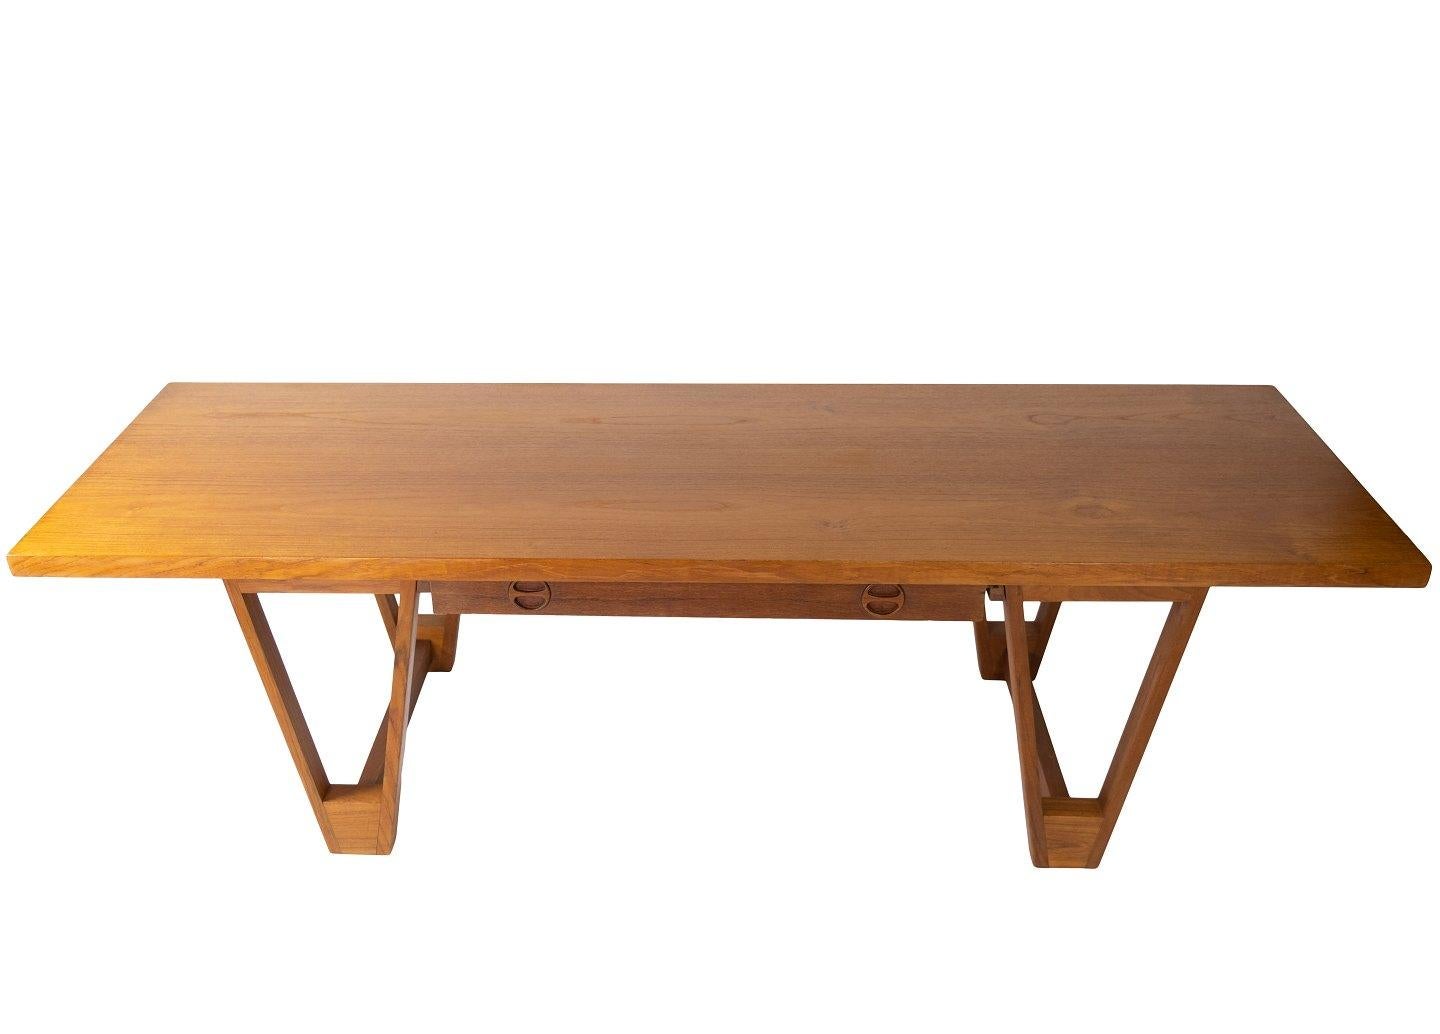 Coffee table in teak designed by Illum Wikkelsø from the 1960s. The table is in great vintage condition.
Measures: H - 51 cm, W - 178 cm and D - 60 cm.